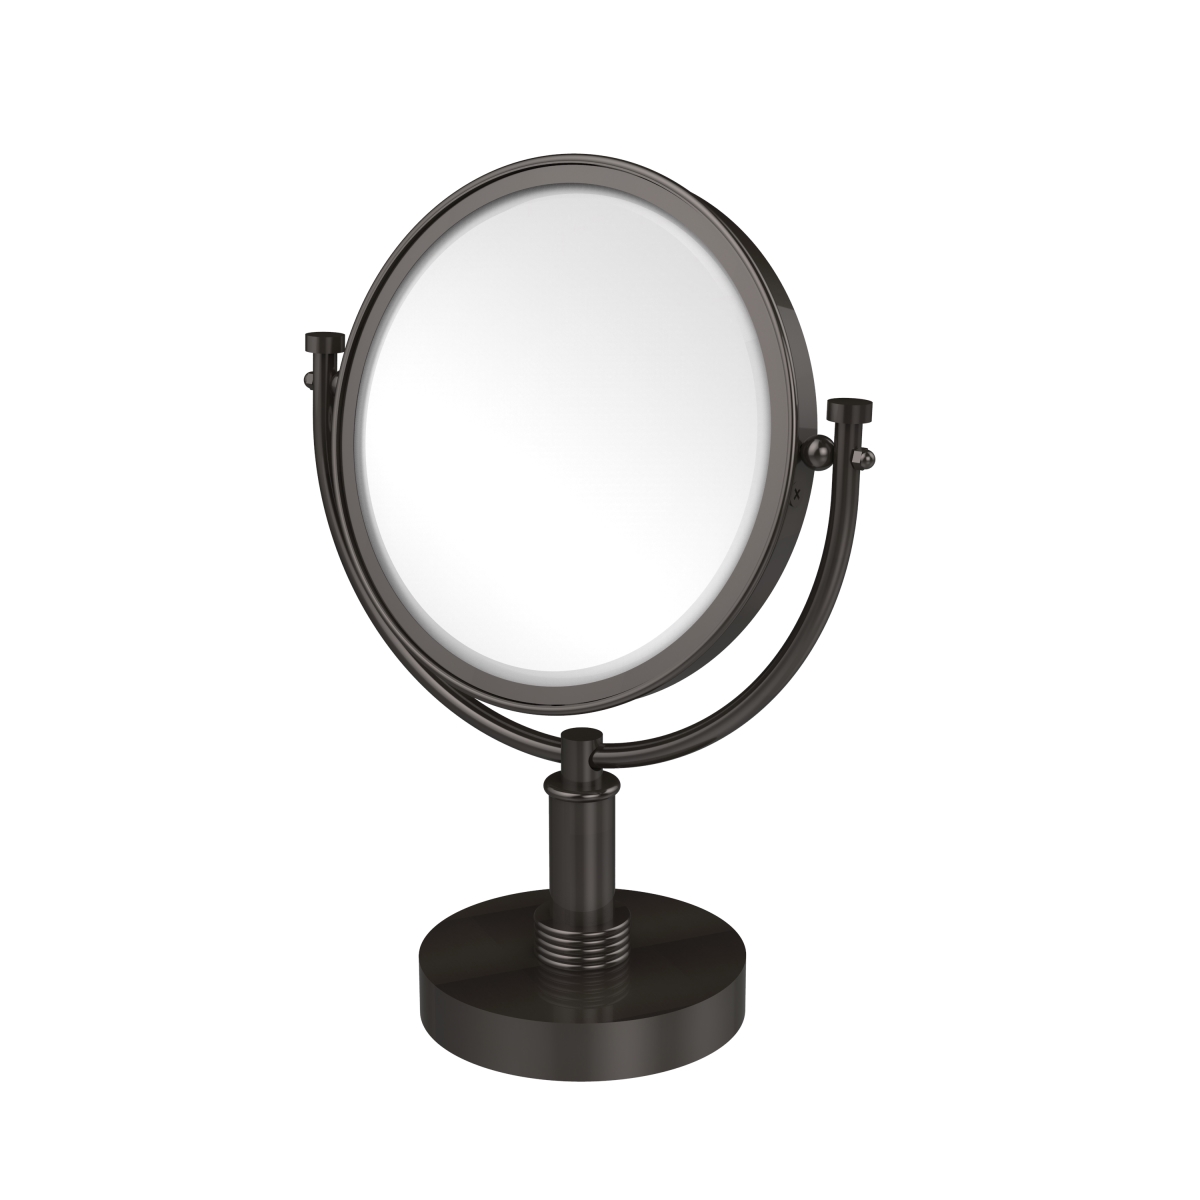 Picture of Allied Brass DM-4G-2X-ORB Grooved Ring Style 8 in. Vanity Top Make-Up Mirror 2X Magnification, Oil Rubbed Bronze